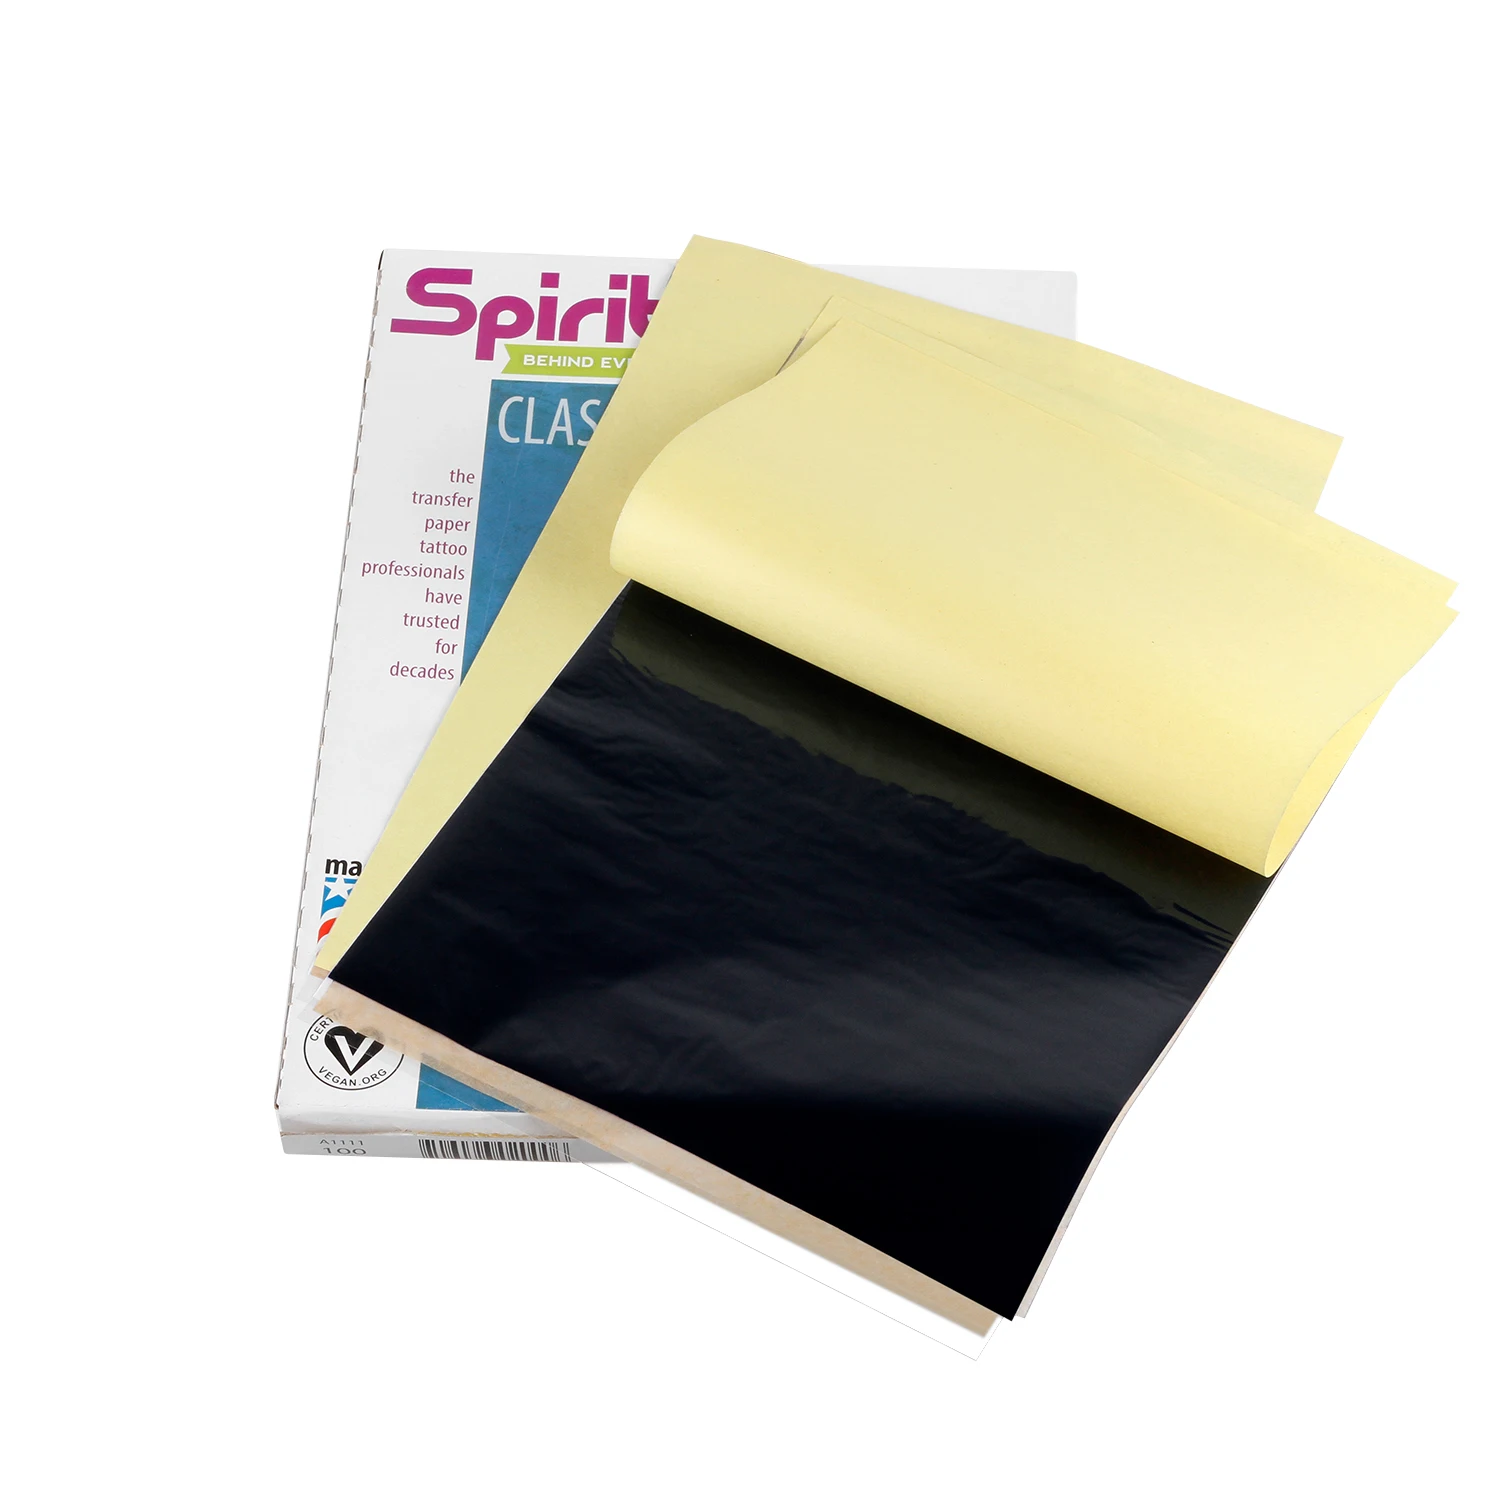 Tattoo Transfer Paper,Spirit Master A4 Size Tattoo Thermal Copier Stencil Papers for Tattoo Transfer Machine Accessories